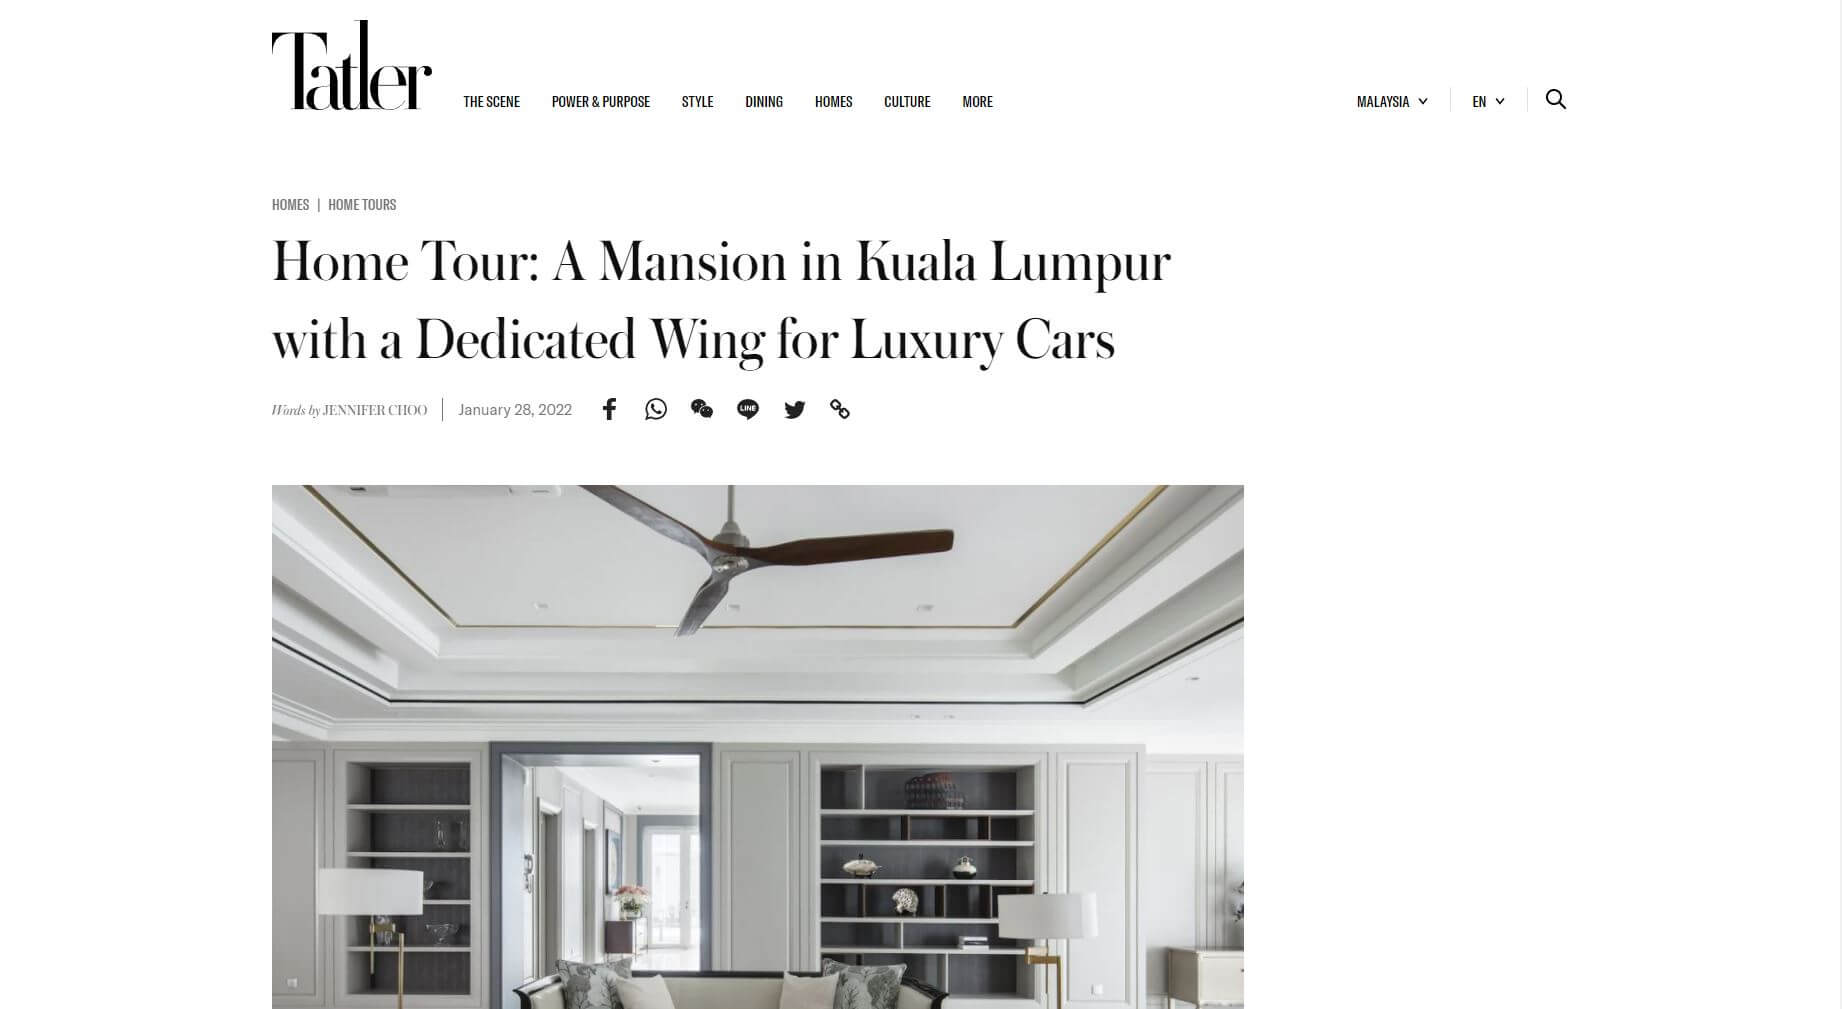 Home Tour: A Mansion in Kuala Lumpur with a Dedicated Wing for Luxury Cars, 28 January 2022